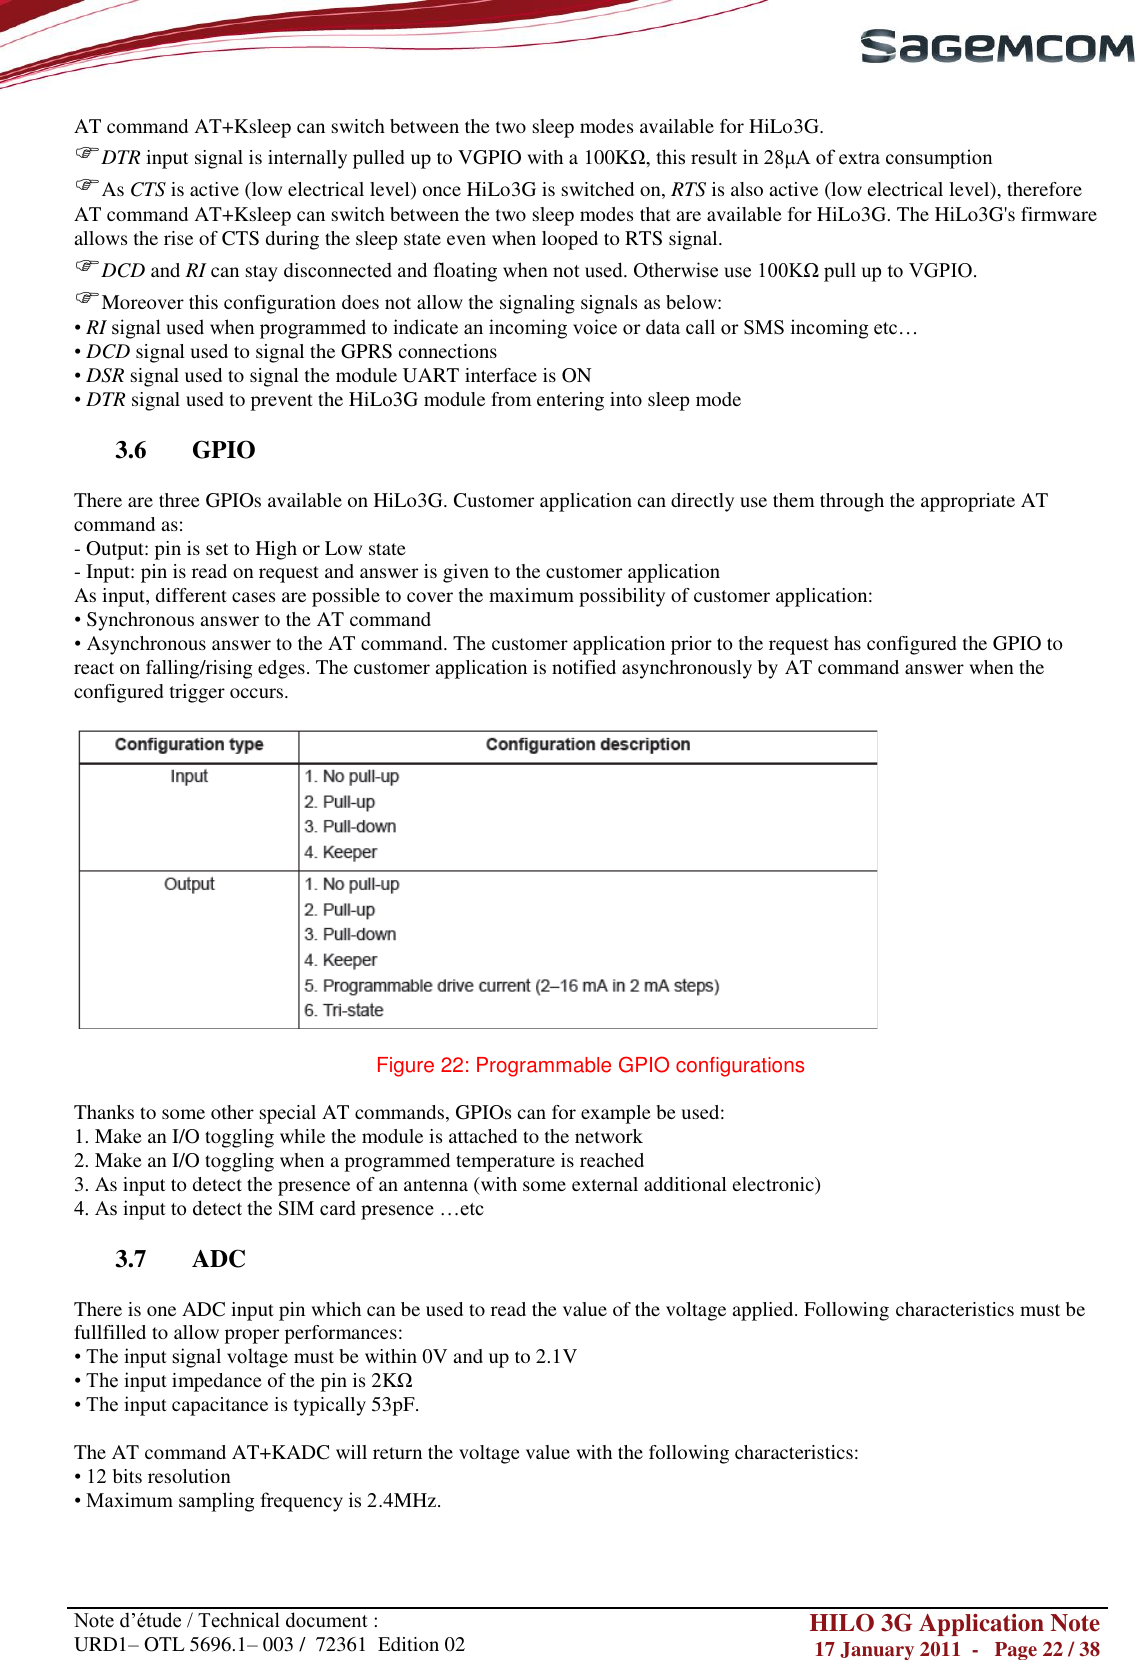       Note d‘étude / Technical document : URD1– OTL 5696.1– 003 /  72361  Edition 02 HILO 3G Application Note 17 January 2011  -   Page 22 / 38    AT command AT+Ksleep can switch between the two sleep modes available for HiLo3G. DTR input signal is internally pulled up to VGPIO with a 100KΩ, this result in 28μA of extra consumption As CTS is active (low electrical level) once HiLo3G is switched on, RTS is also active (low electrical level), therefore AT command AT+Ksleep can switch between the two sleep modes that are available for HiLo3G. The HiLo3G&apos;s firmware allows the rise of CTS during the sleep state even when looped to RTS signal. DCD and RI can stay disconnected and floating when not used. Otherwise use 100KΩ pull up to VGPIO. Moreover this configuration does not allow the signaling signals as below: • RI signal used when programmed to indicate an incoming voice or data call or SMS incoming etc… • DCD signal used to signal the GPRS connections • DSR signal used to signal the module UART interface is ON • DTR signal used to prevent the HiLo3G module from entering into sleep mode  3.6 GPIO  There are three GPIOs available on HiLo3G. Customer application can directly use them through the appropriate AT command as: - Output: pin is set to High or Low state - Input: pin is read on request and answer is given to the customer application As input, different cases are possible to cover the maximum possibility of customer application: • Synchronous answer to the AT command • Asynchronous answer to the AT command. The customer application prior to the request has configured the GPIO to react on falling/rising edges. The customer application is notified asynchronously by AT command answer when the configured trigger occurs.    Figure 22: Programmable GPIO configurations   Thanks to some other special AT commands, GPIOs can for example be used:  1. Make an I/O toggling while the module is attached to the network   2. Make an I/O toggling when a programmed temperature is reached  3. As input to detect the presence of an antenna (with some external additional electronic)  4. As input to detect the SIM card presence …etc  3.7 ADC  There is one ADC input pin which can be used to read the value of the voltage applied. Following characteristics must be fullfilled to allow proper performances: • The input signal voltage must be within 0V and up to 2.1V • The input impedance of the pin is 2KΩ • The input capacitance is typically 53pF.  The AT command AT+KADC will return the voltage value with the following characteristics: • 12 bits resolution • Maximum sampling frequency is 2.4MHz.  